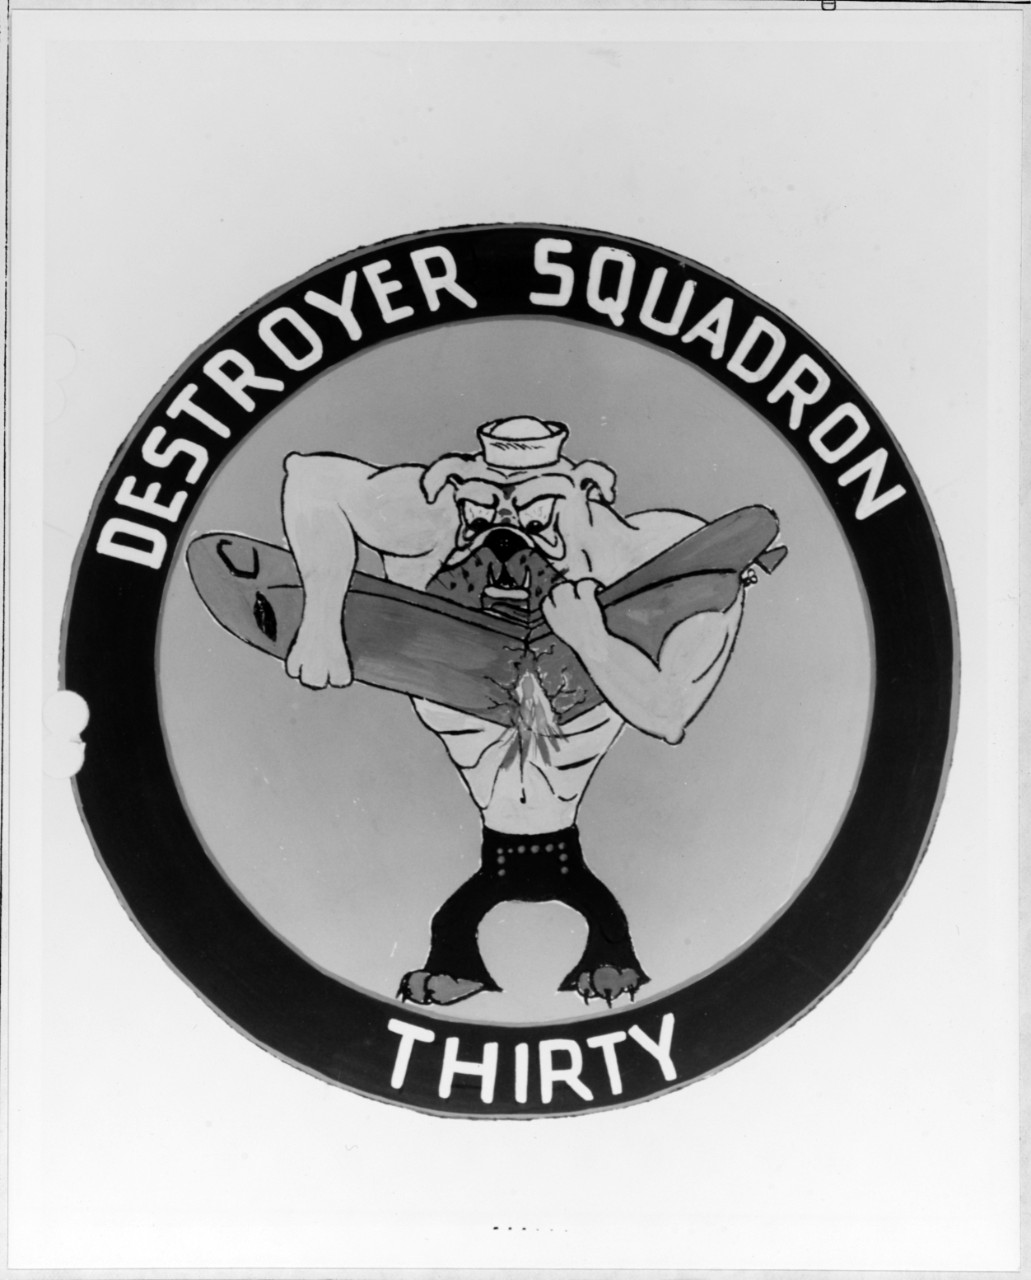 Insignia:  Destroyer Squadron Thirty